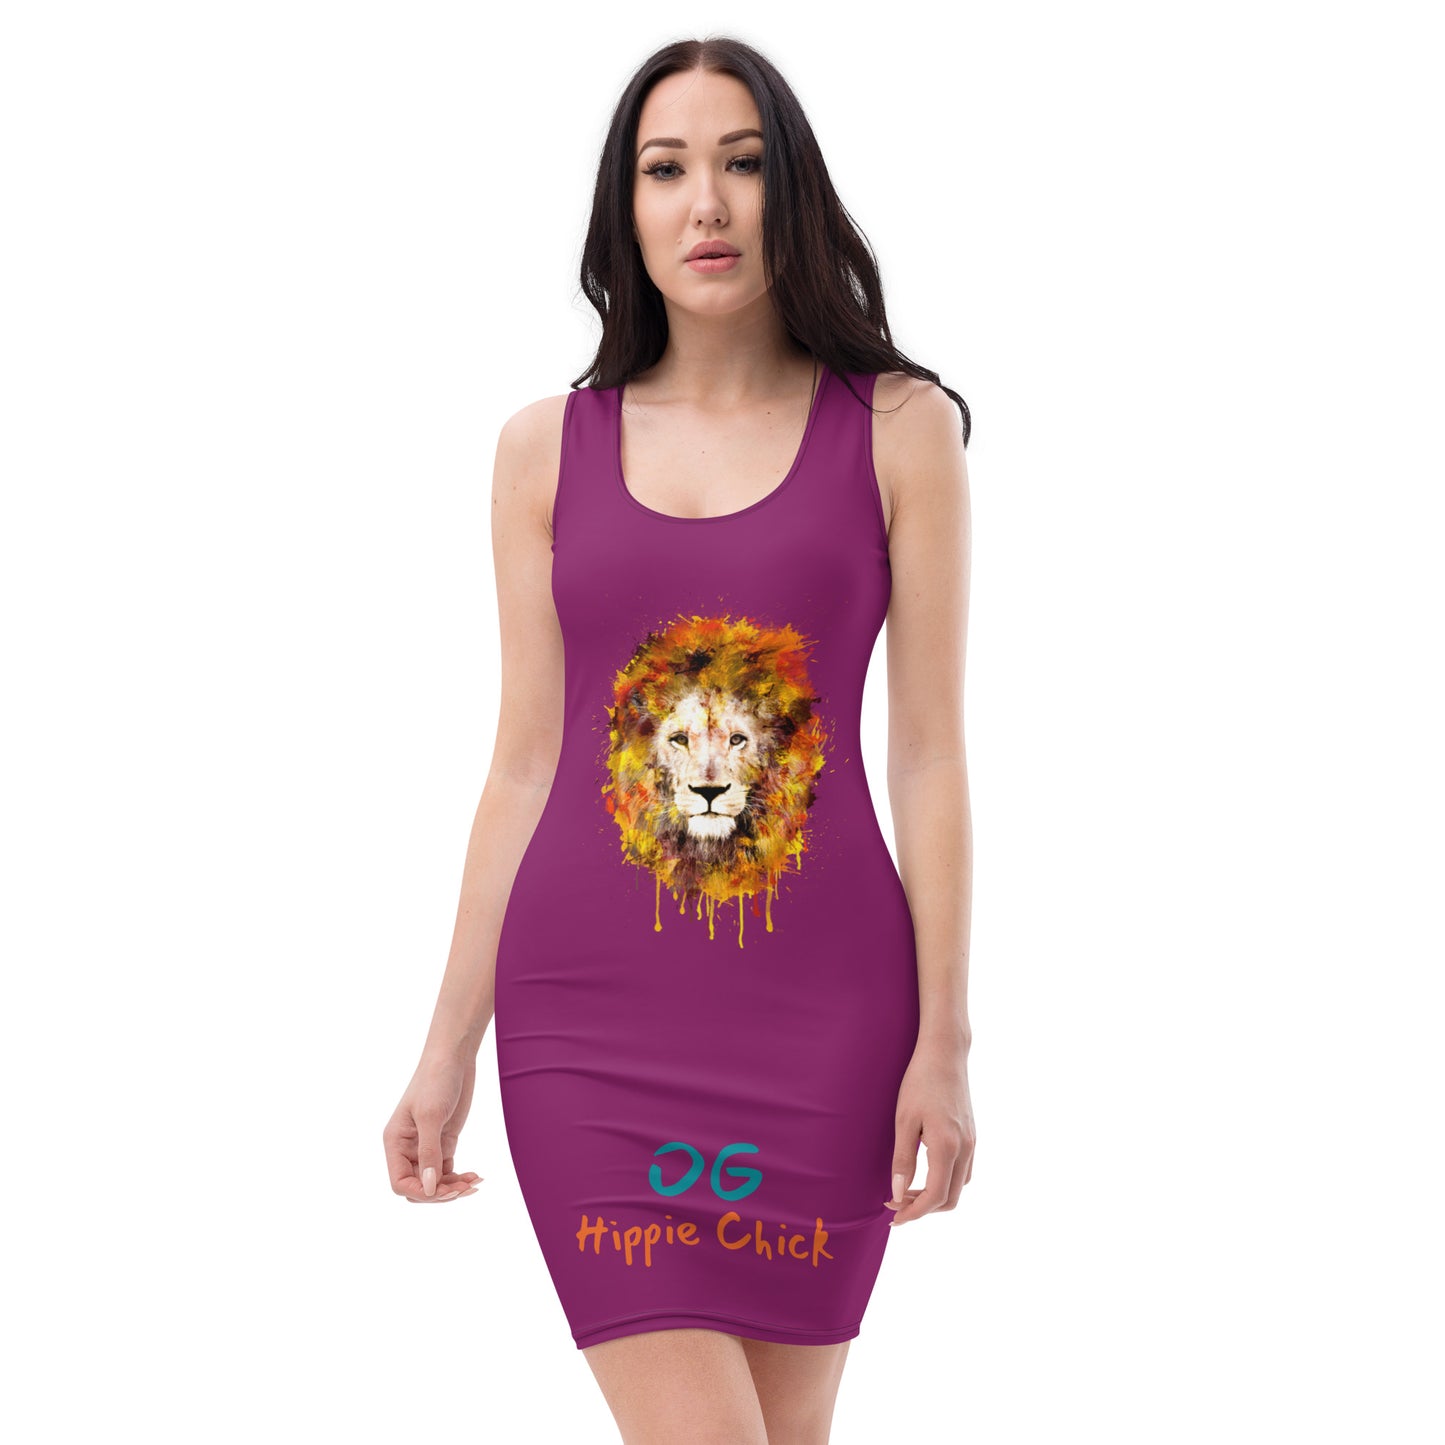 Eggplant Fitted Dress (Lion front)